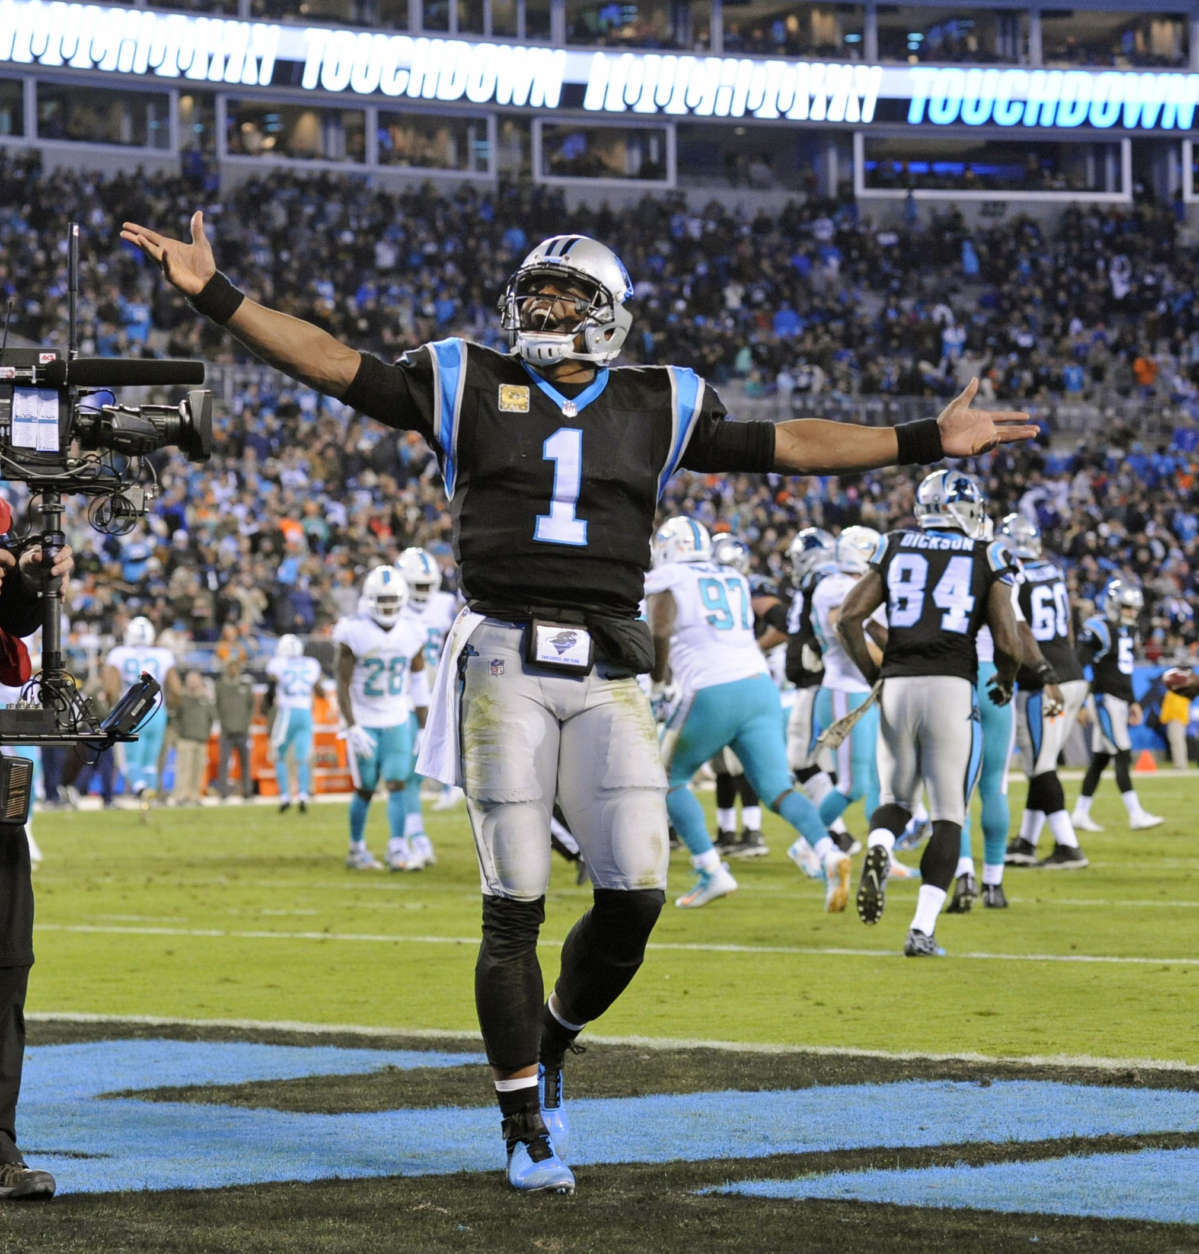 Carolina Panthers' Cam Newton (1) celebrates a touchdown pass against the Miami Dolphins in the second half of an NFL football game in Charlotte, N.C., Monday, Nov. 13, 2017. (AP Photo/Mike McCarn)